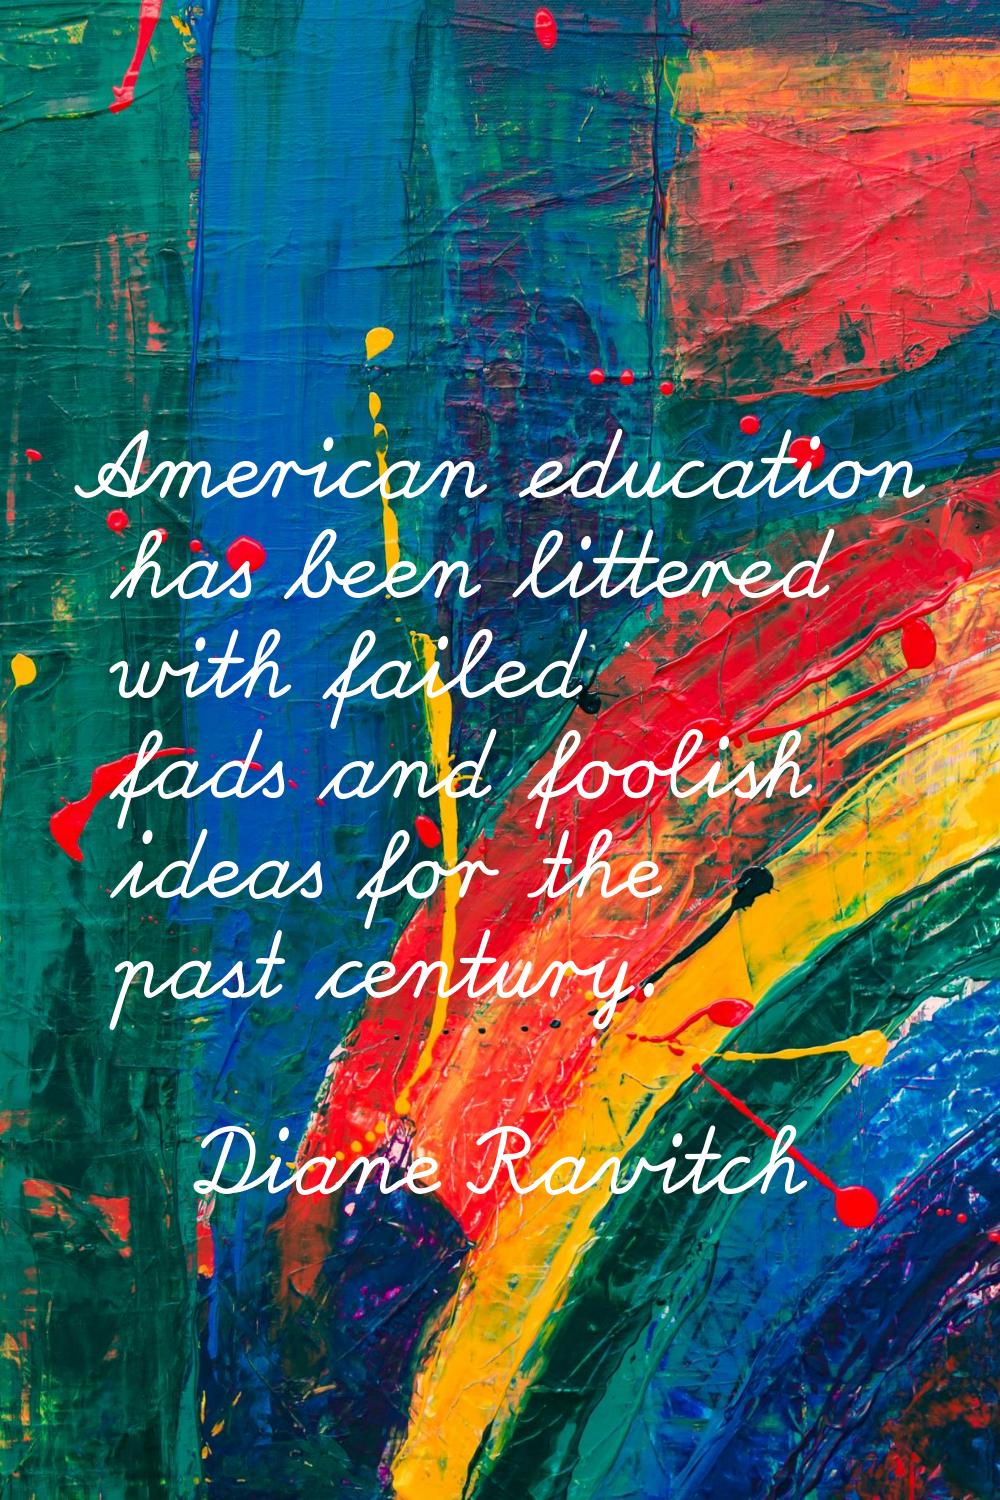 American education has been littered with failed fads and foolish ideas for the past century.